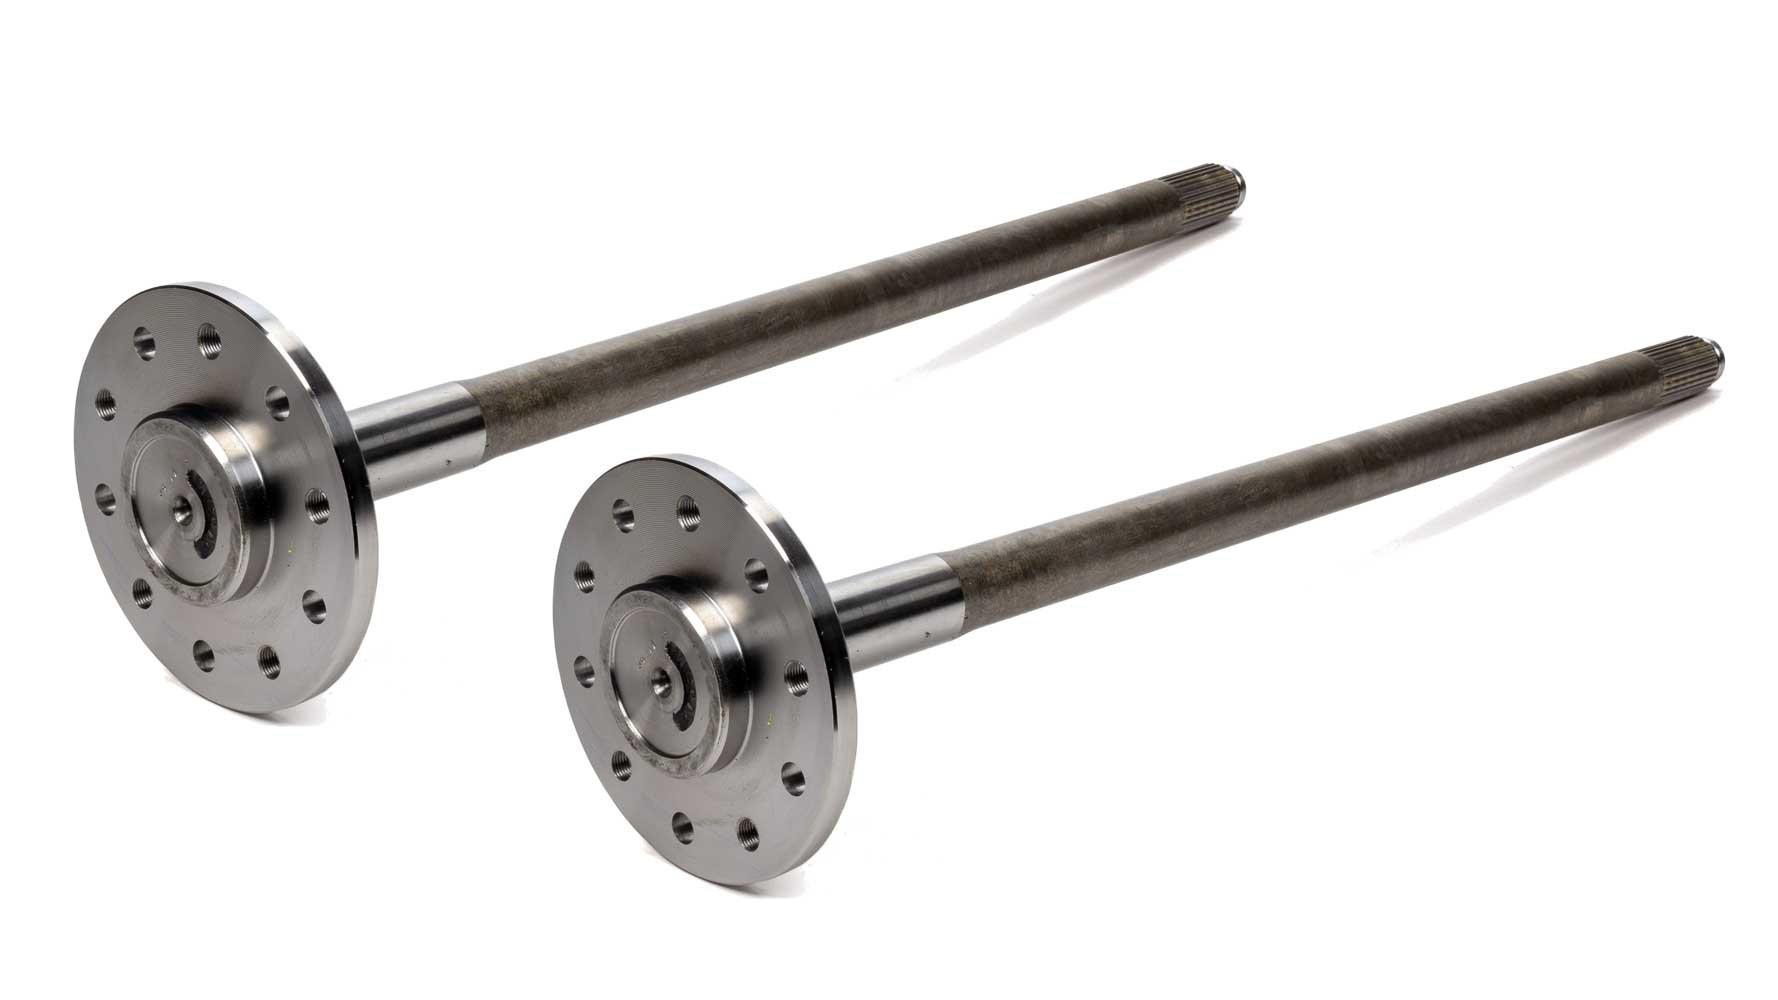 Moser Engineering A103003 Axle Shaft, 30-1/16 in Long, 30 Spline Carrier, 5 x 4.75 in Bolt Pattern, C-Clip, Steel, Natural, GM 10-Bolt, GM A-Body 1968-72 / F-Body 1970-81, Each